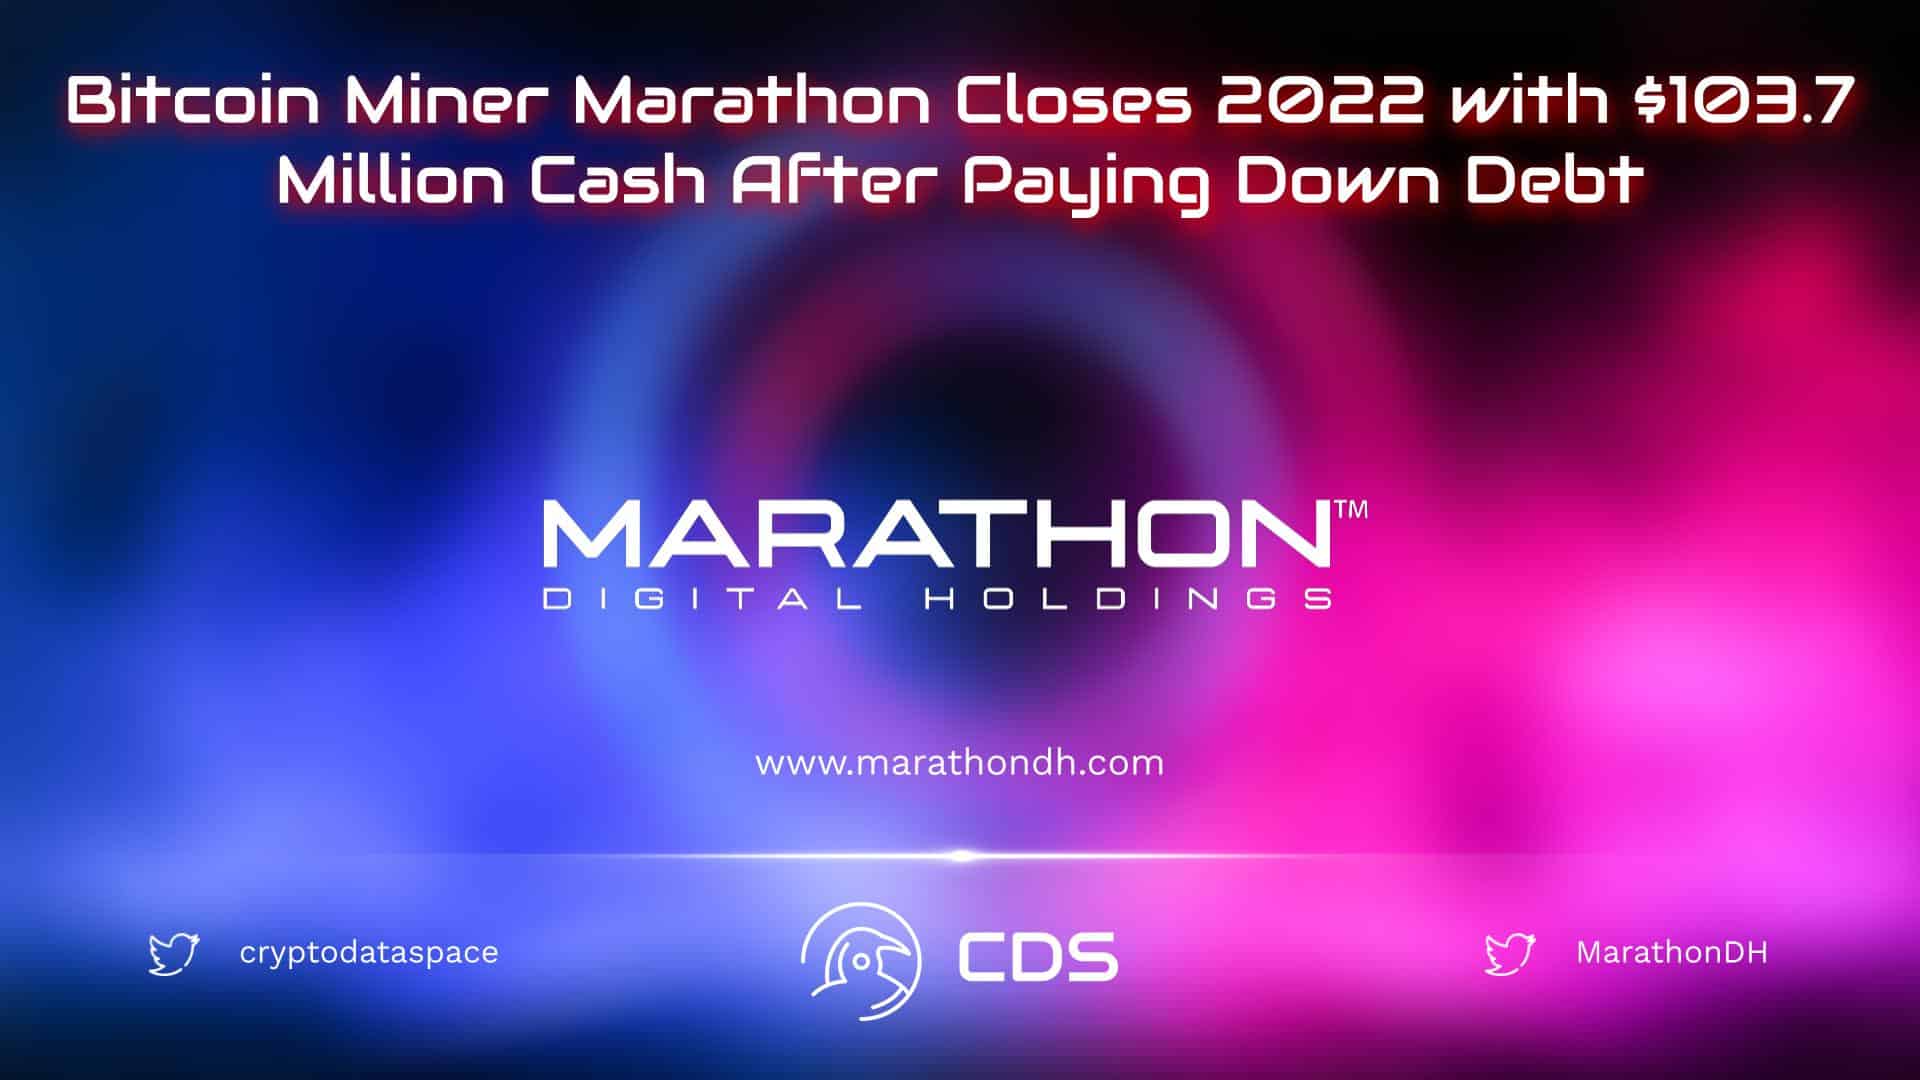 Bitcoin Miner Marathon Closes 2022 with $103.7 Million Cash After Paying Down Debt